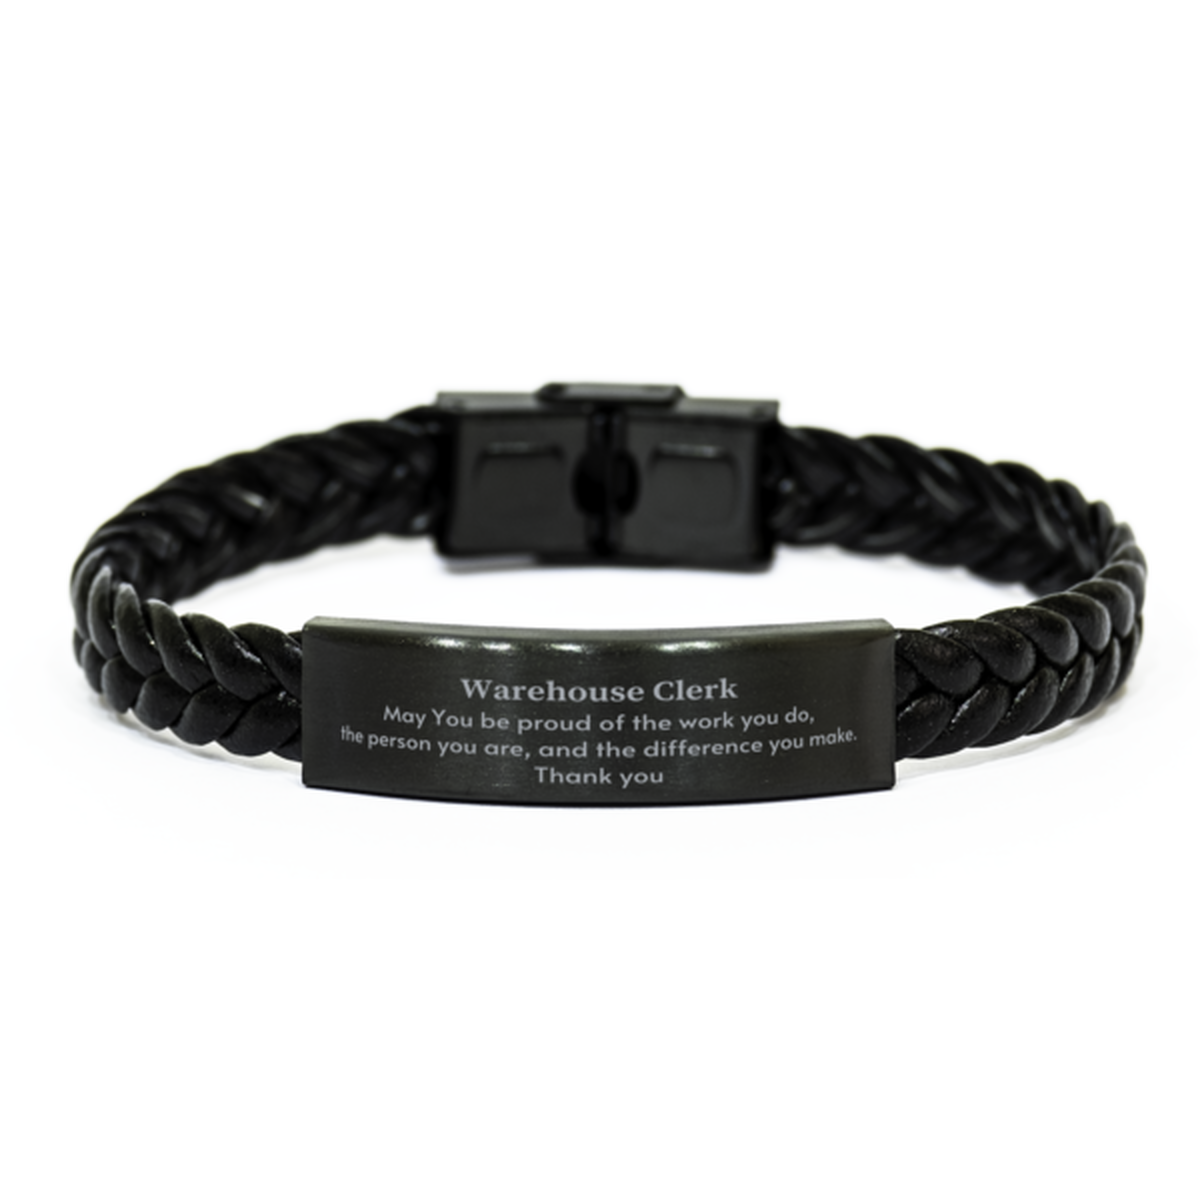 Heartwarming Braided Leather Bracelet Retirement Coworkers Gifts for Warehouse Clerk, Warehouse Clerk May You be proud of the work you do, the person you are Gifts for Boss Men Women Friends